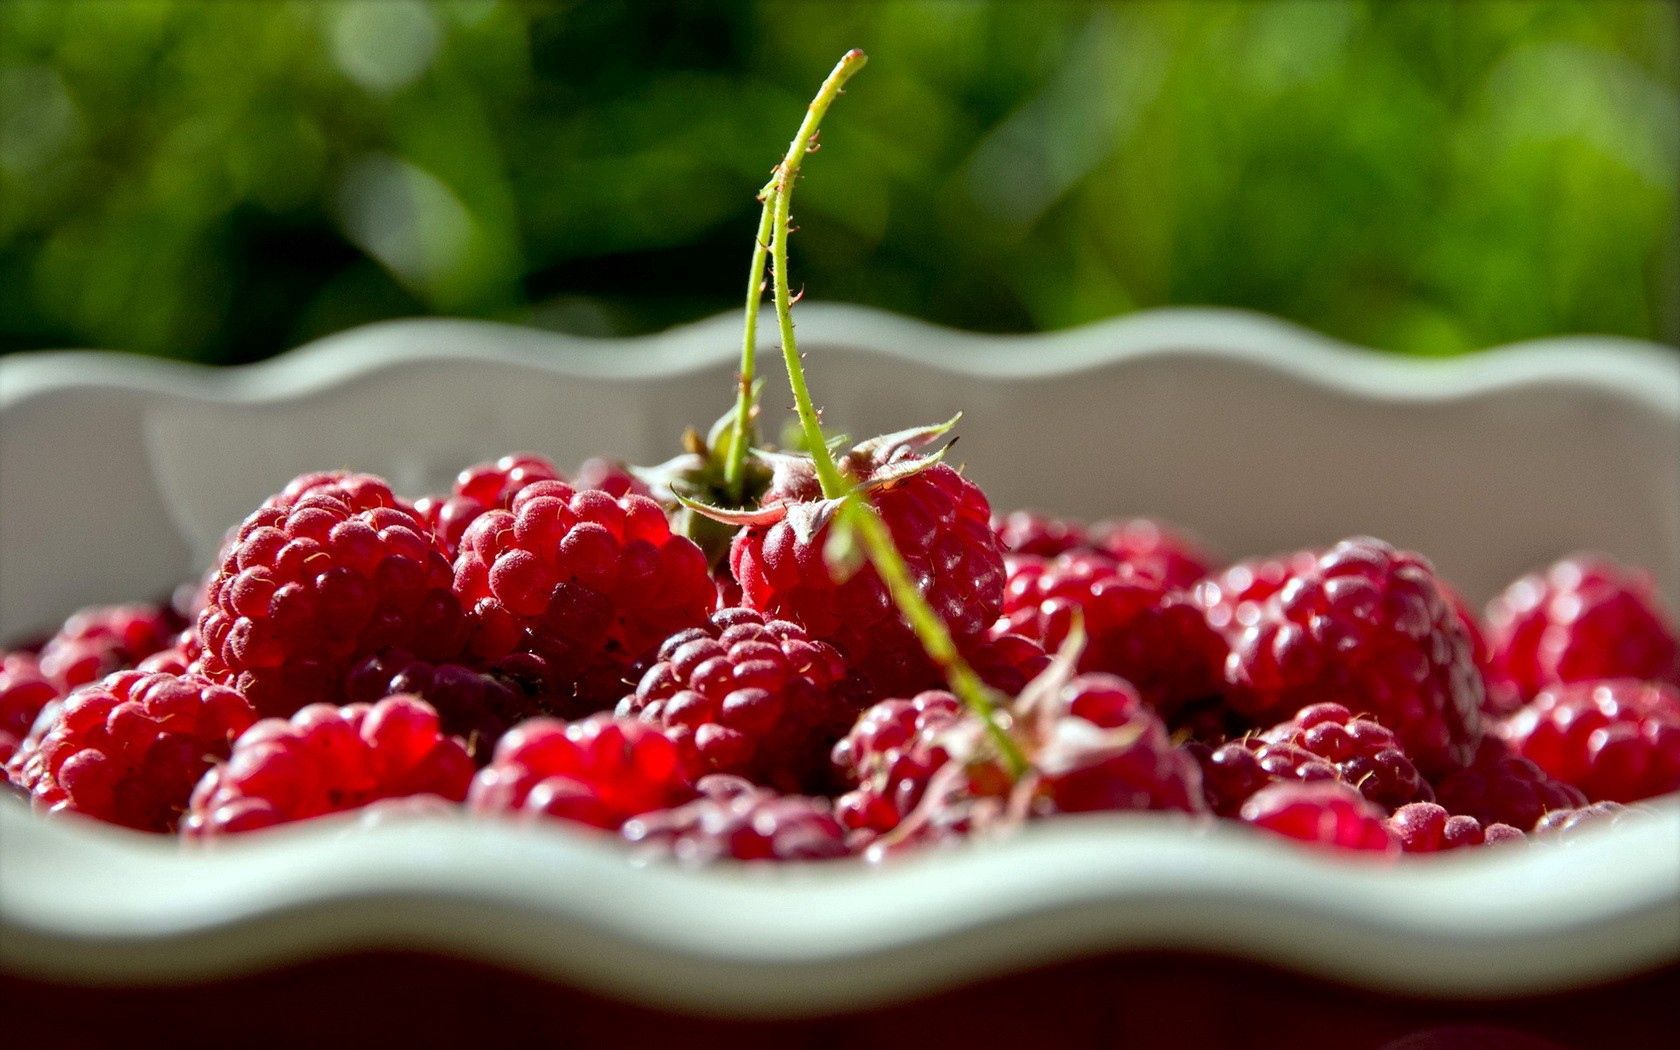 115681 download wallpaper food, raspberry, berries, shadow, plate screensavers and pictures for free